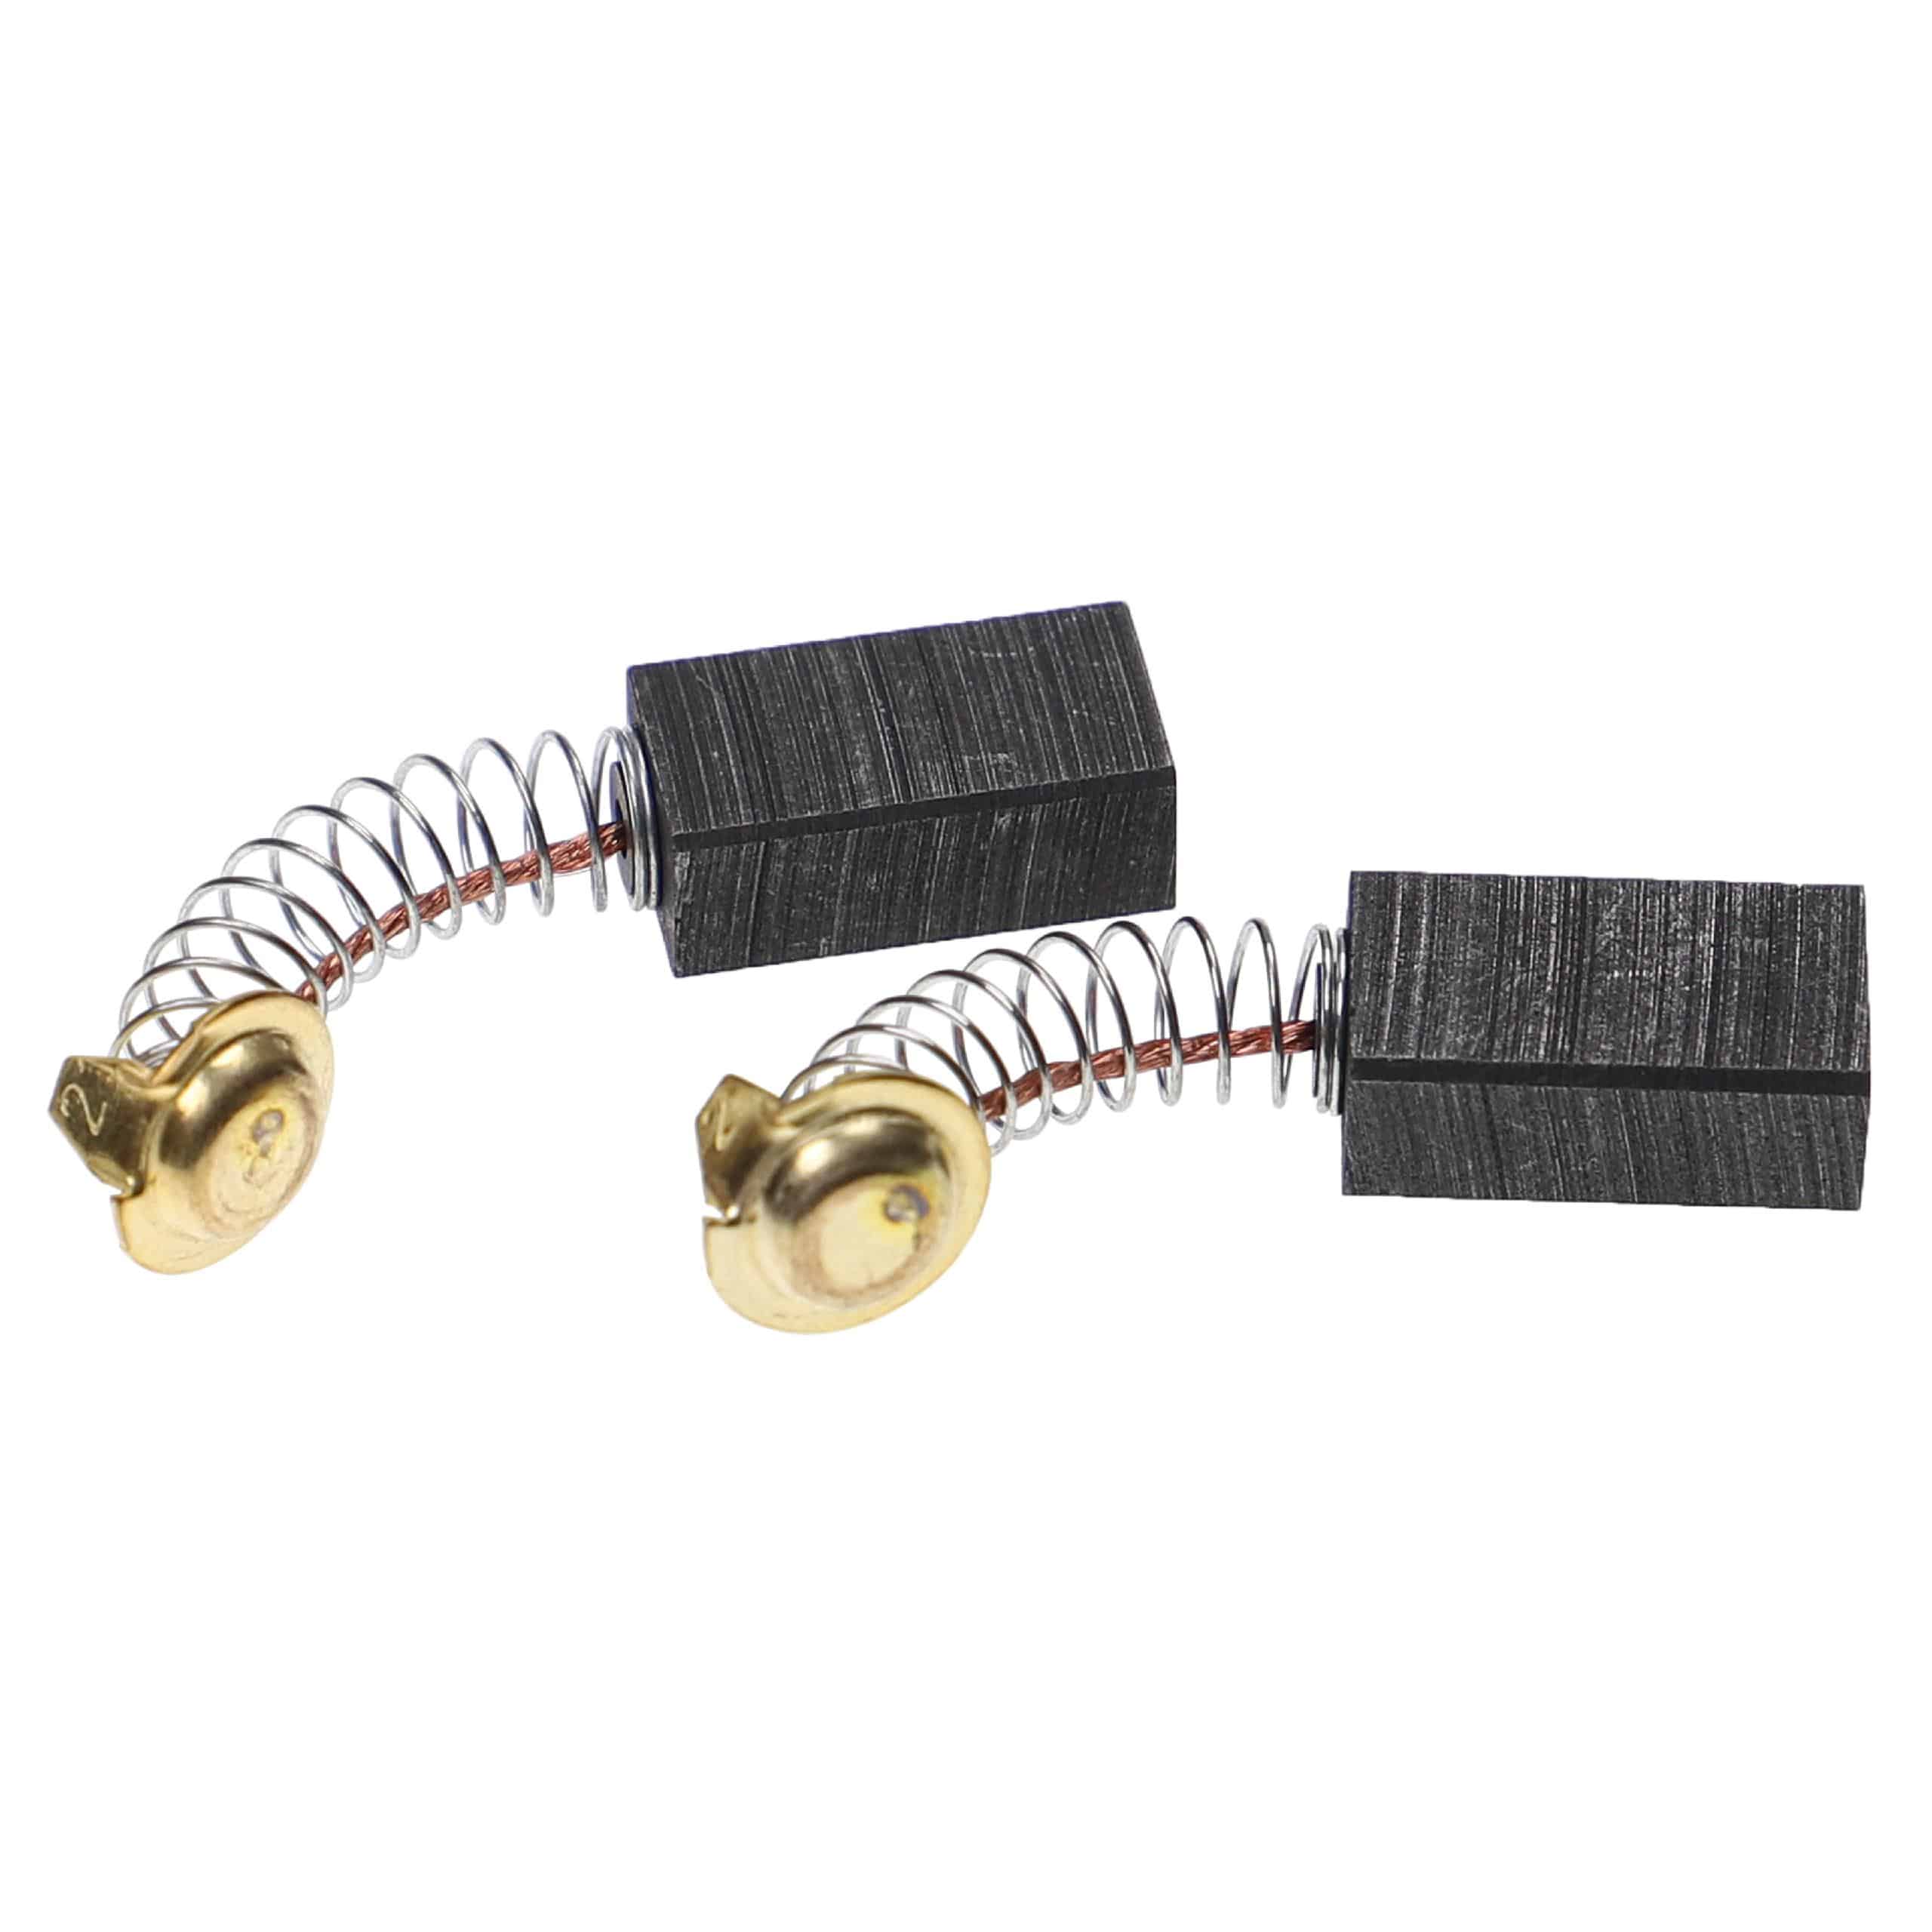 2x Carbon Brush as Replacement for Hitachi 999-088 Electric Power Tools + Spring, 6.55 x 9 x 17mm